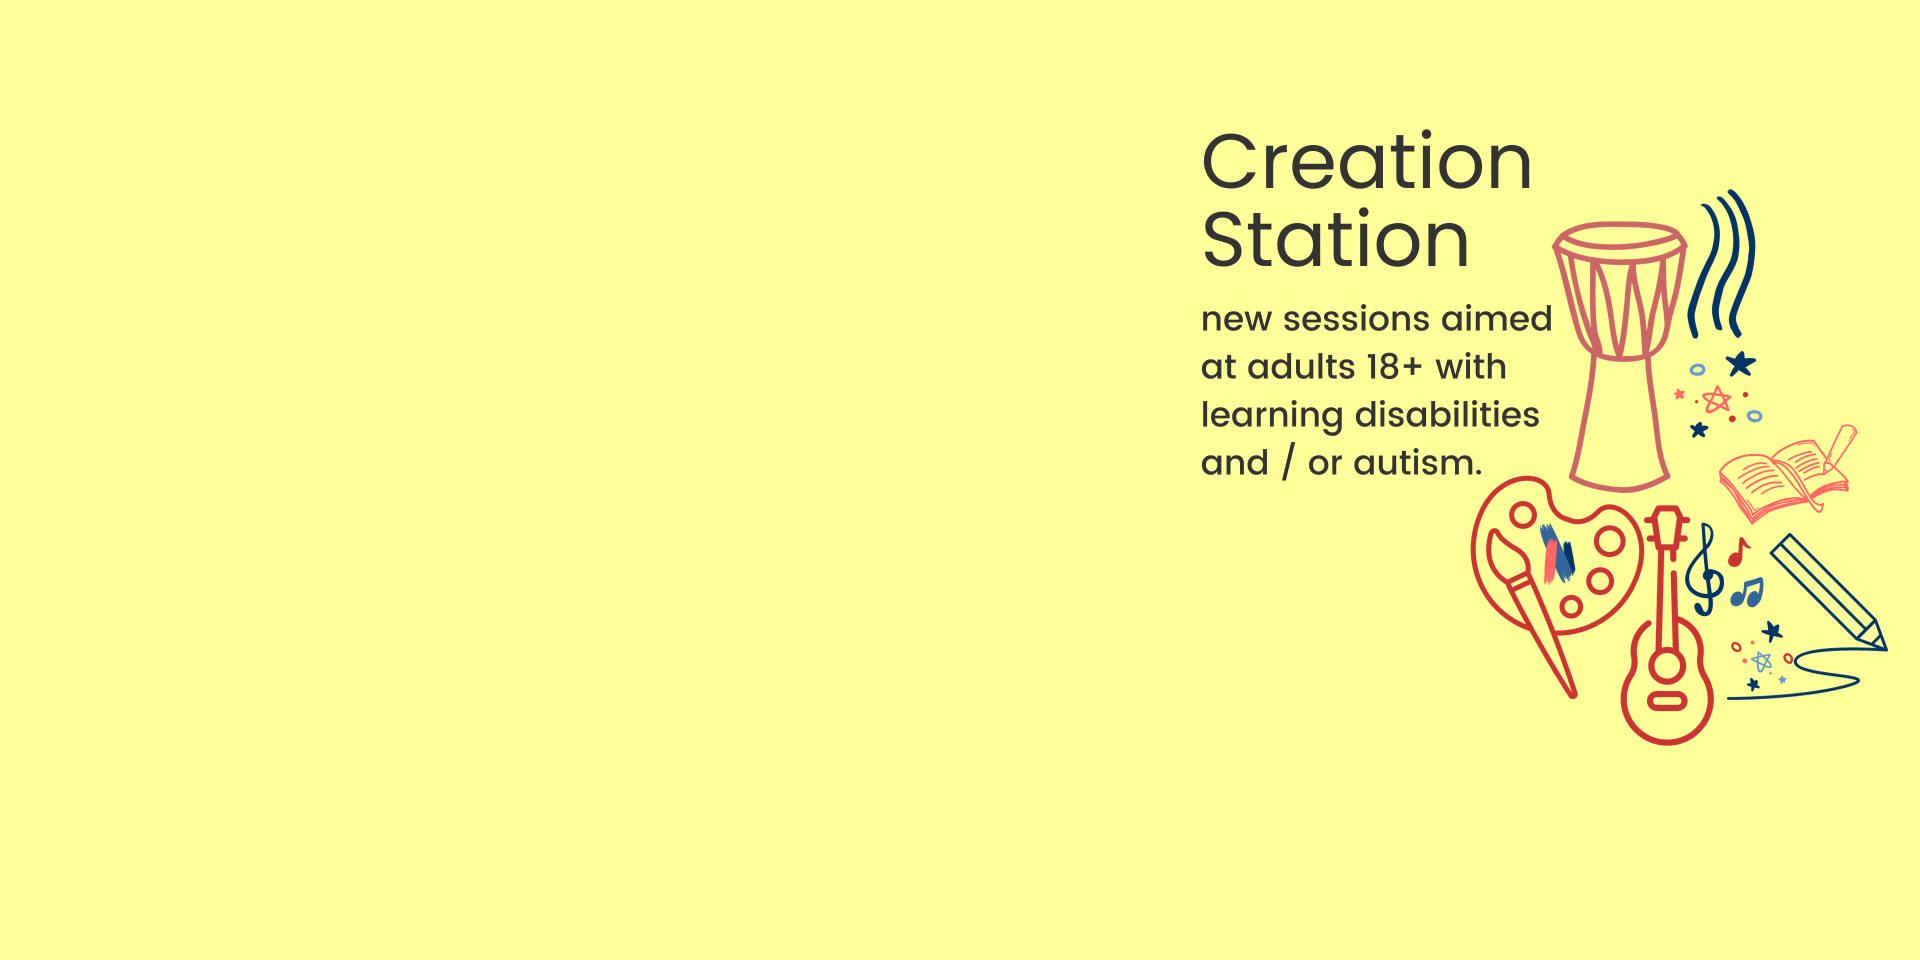 yellow background with images of instruments and the following text: Creative Station new sessions aimed  at adults 18+ with learning disabilities  and / or autism.